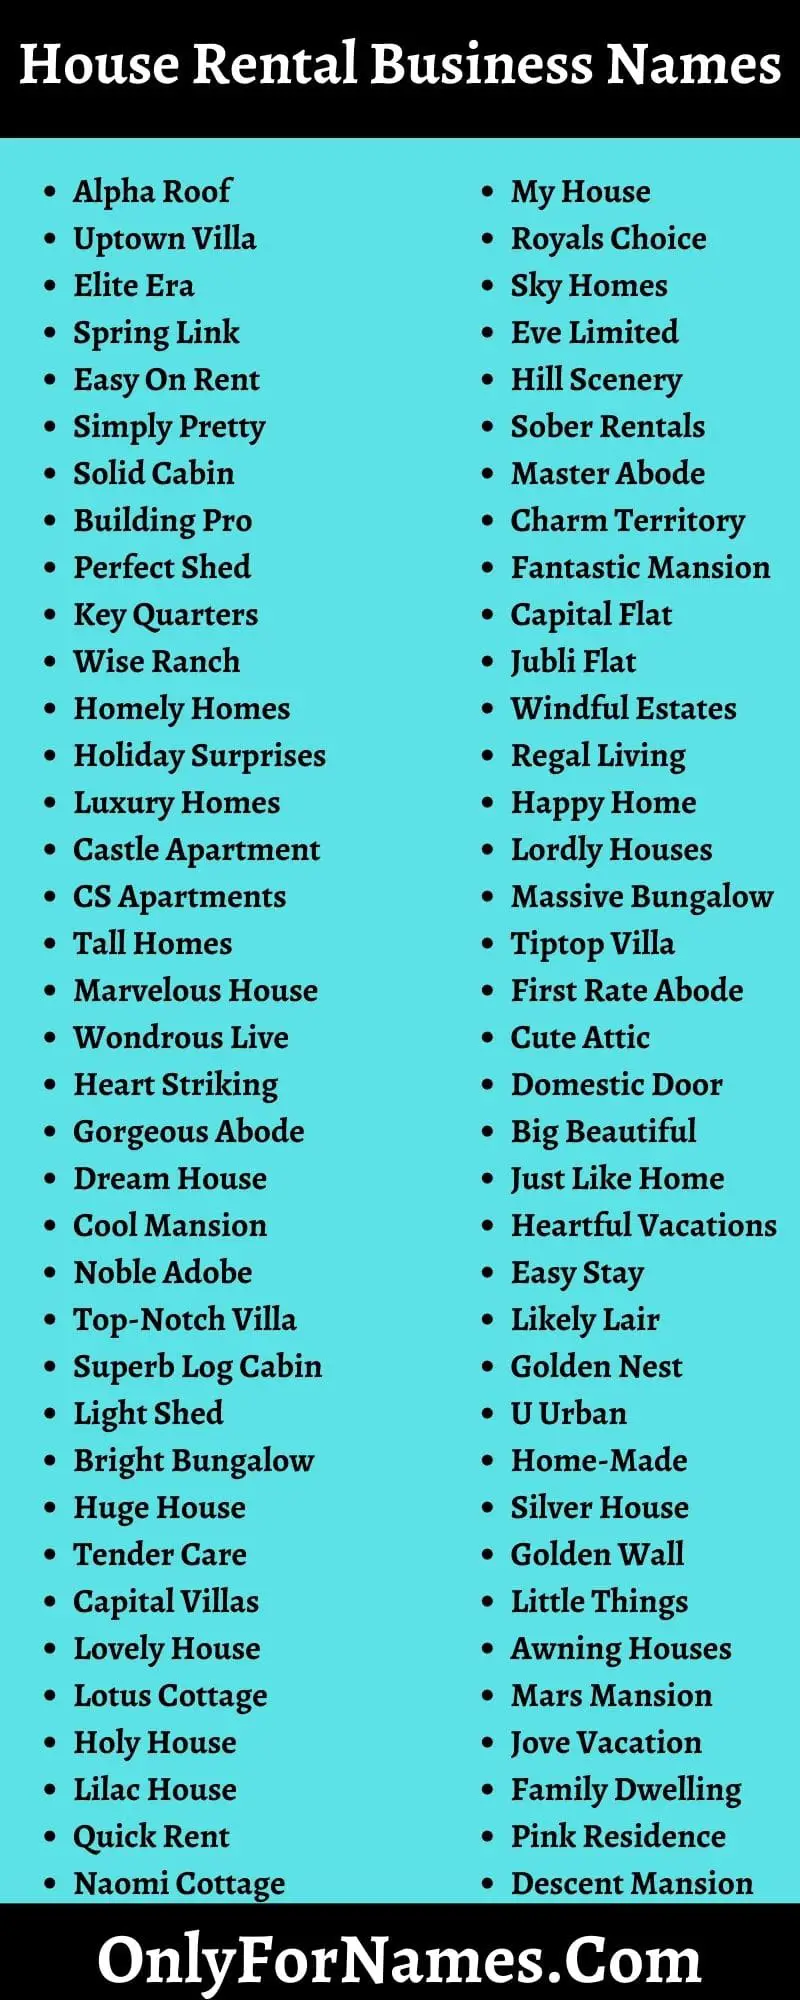 House Rental Business Names